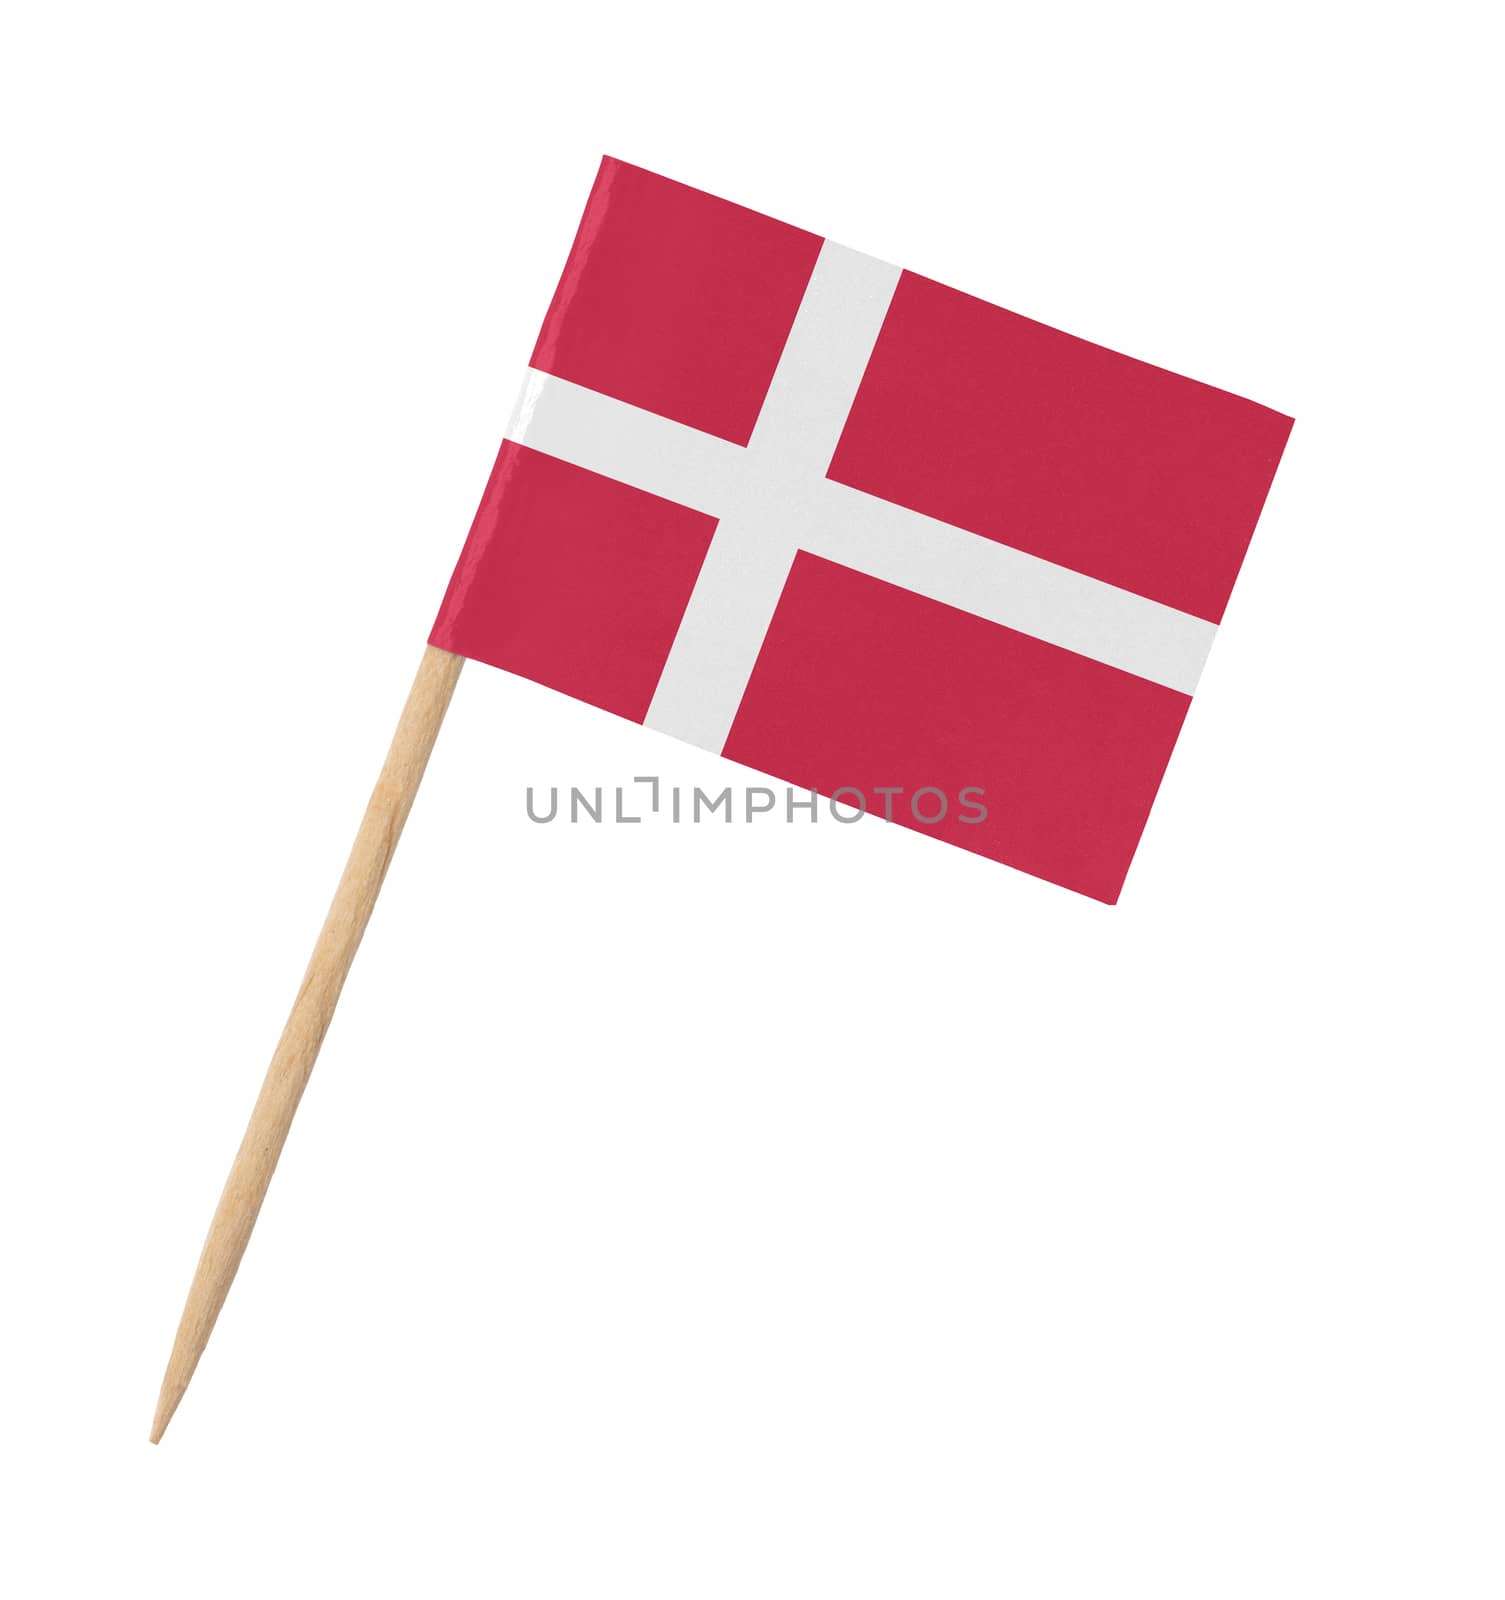 Small paper Danish flag on wooden stick by michaklootwijk